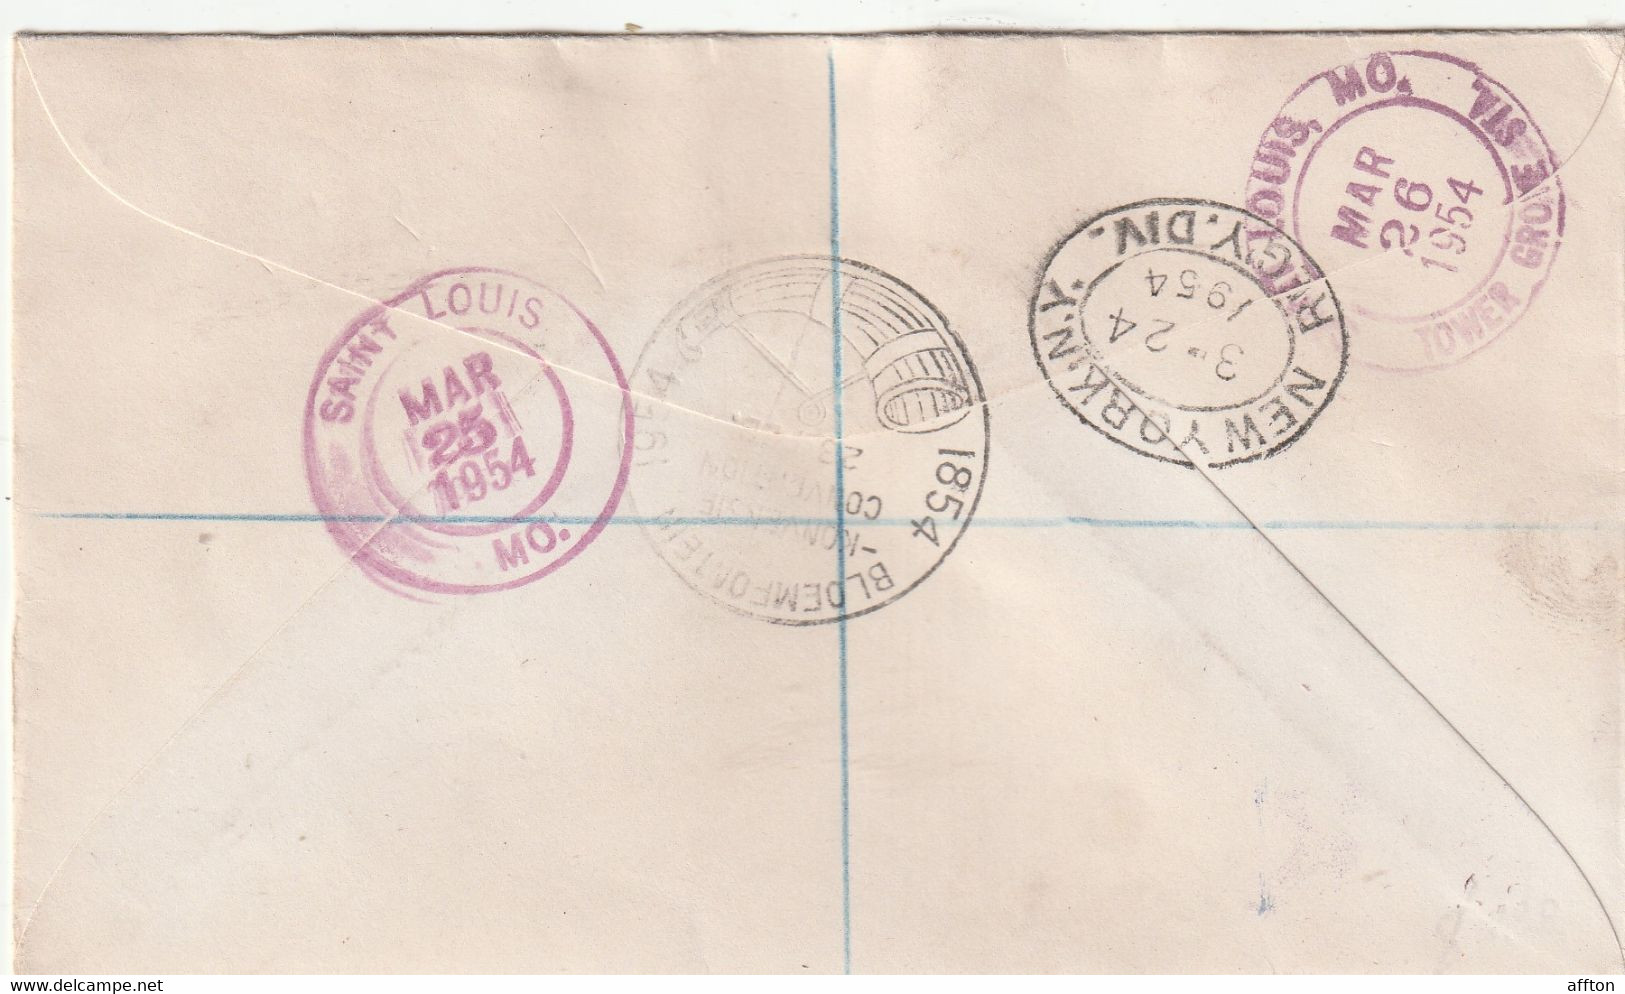 South Africa 1954 FDC - FDC